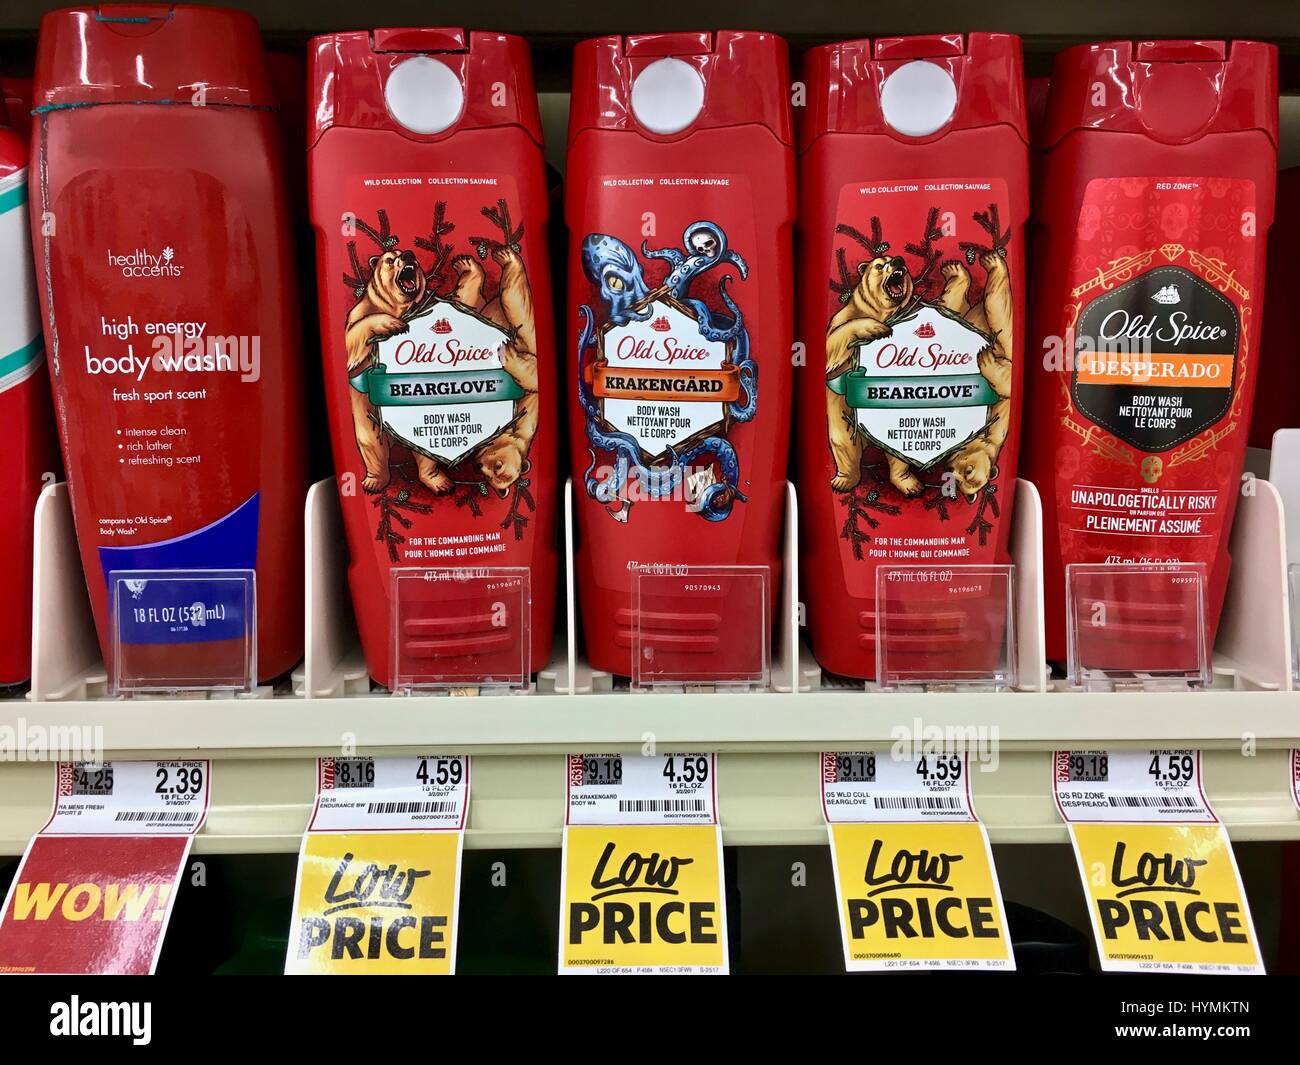 Old Spice High Resolution Stock Photography and Images - Alamy